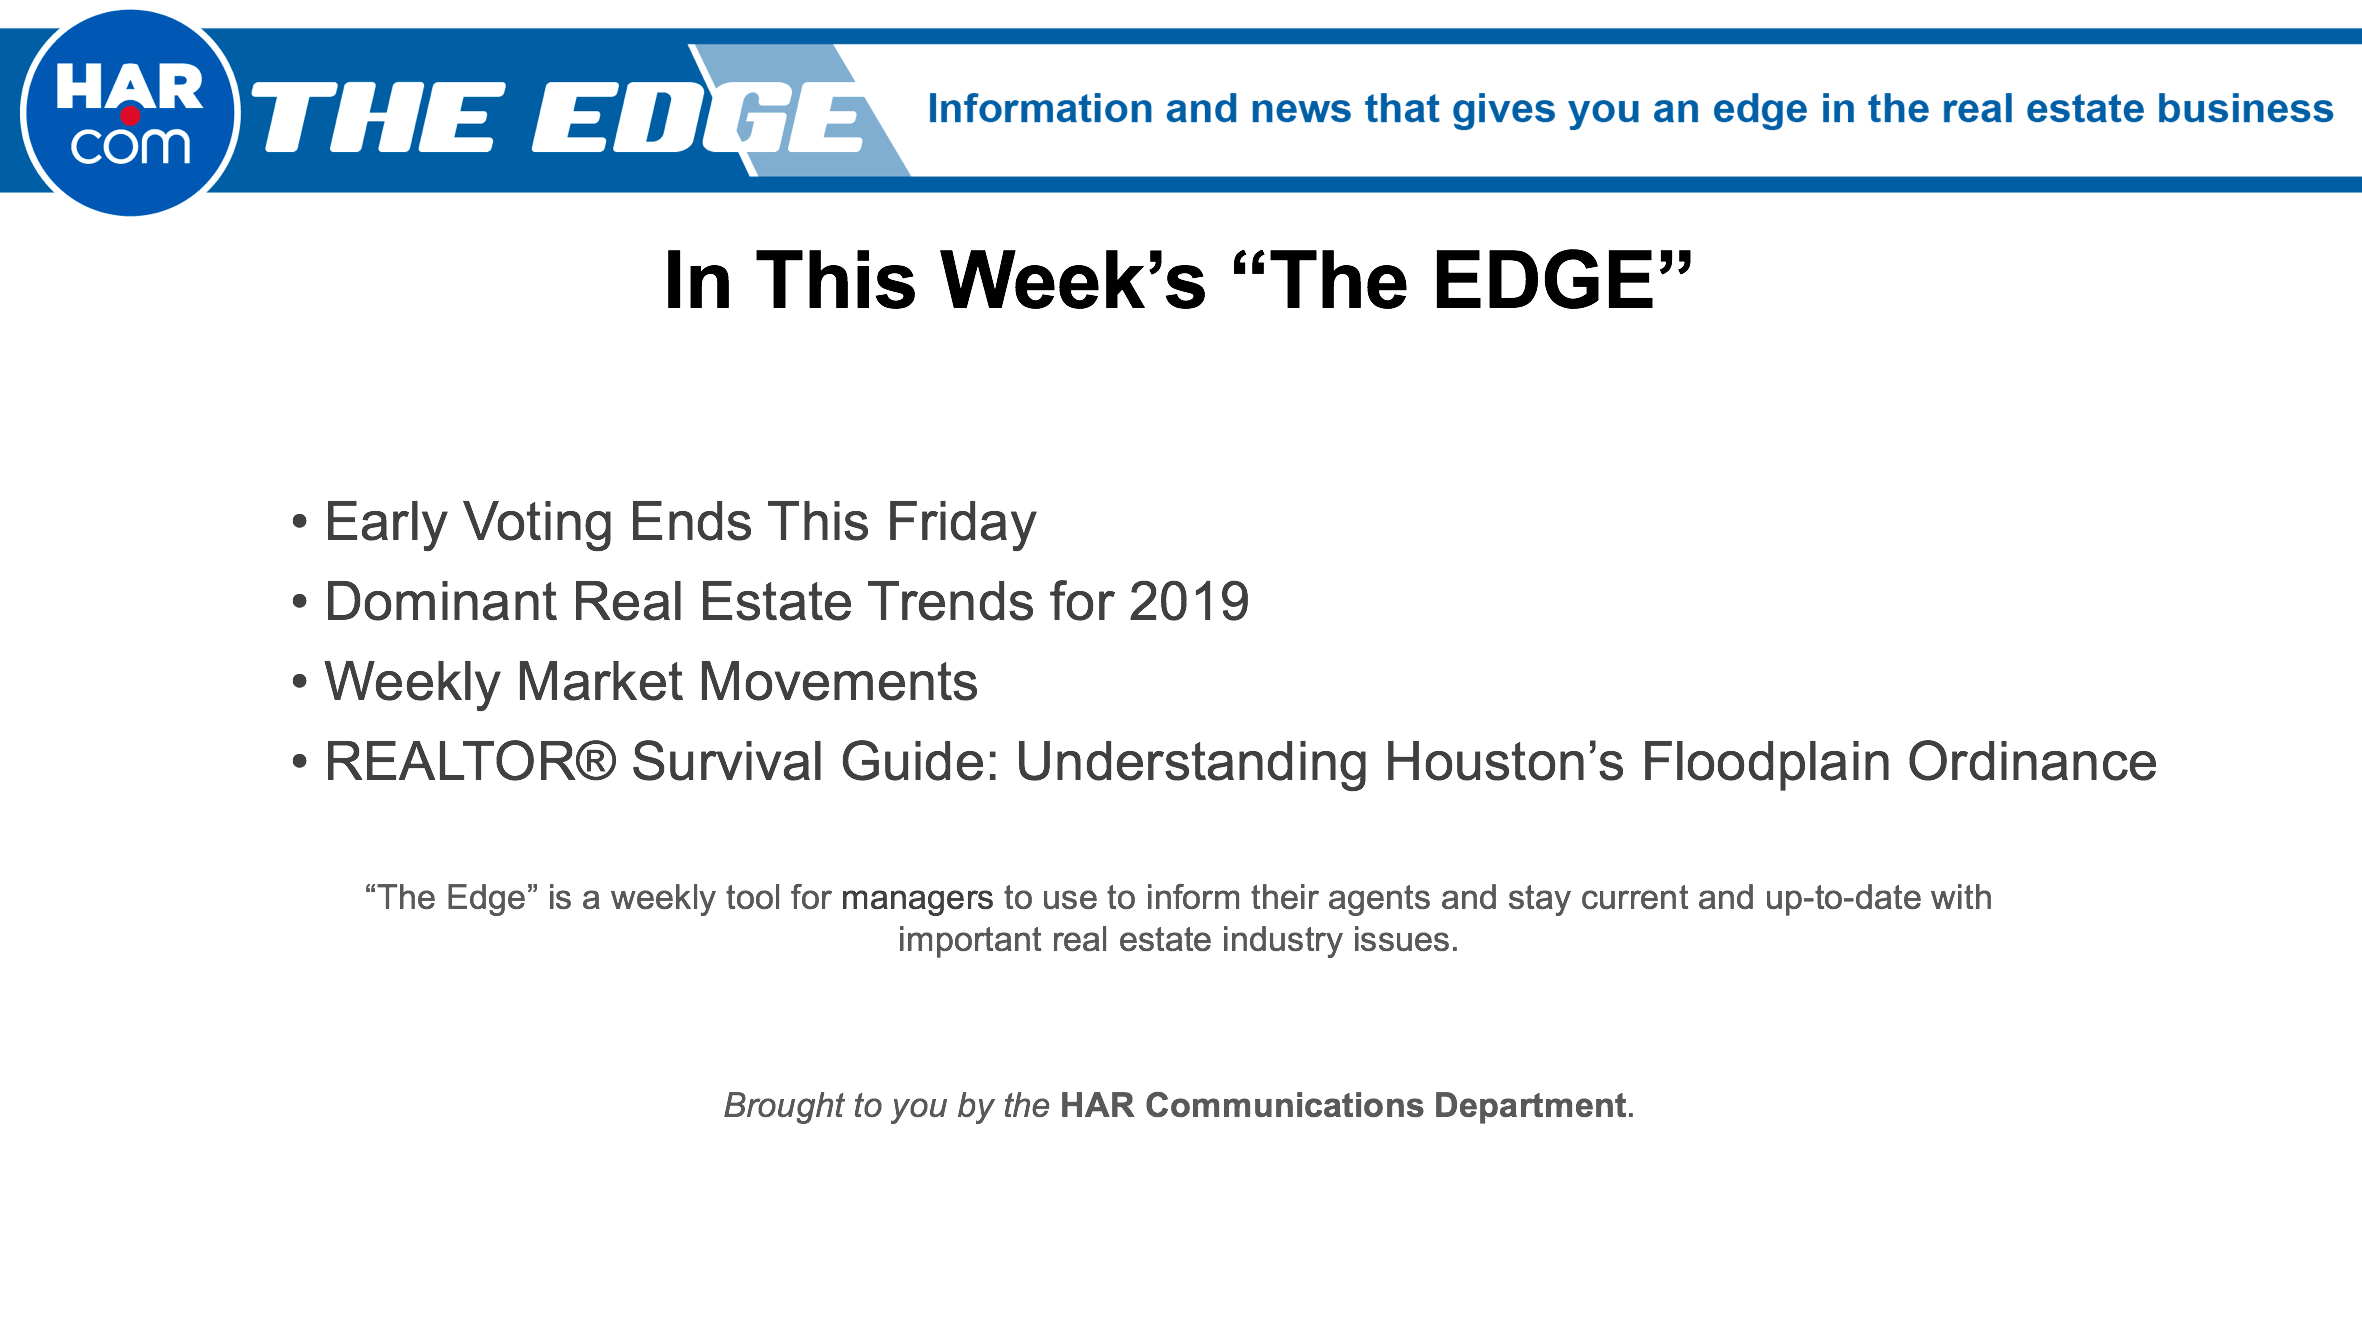 The EDGE: Week Of October 29, 2018